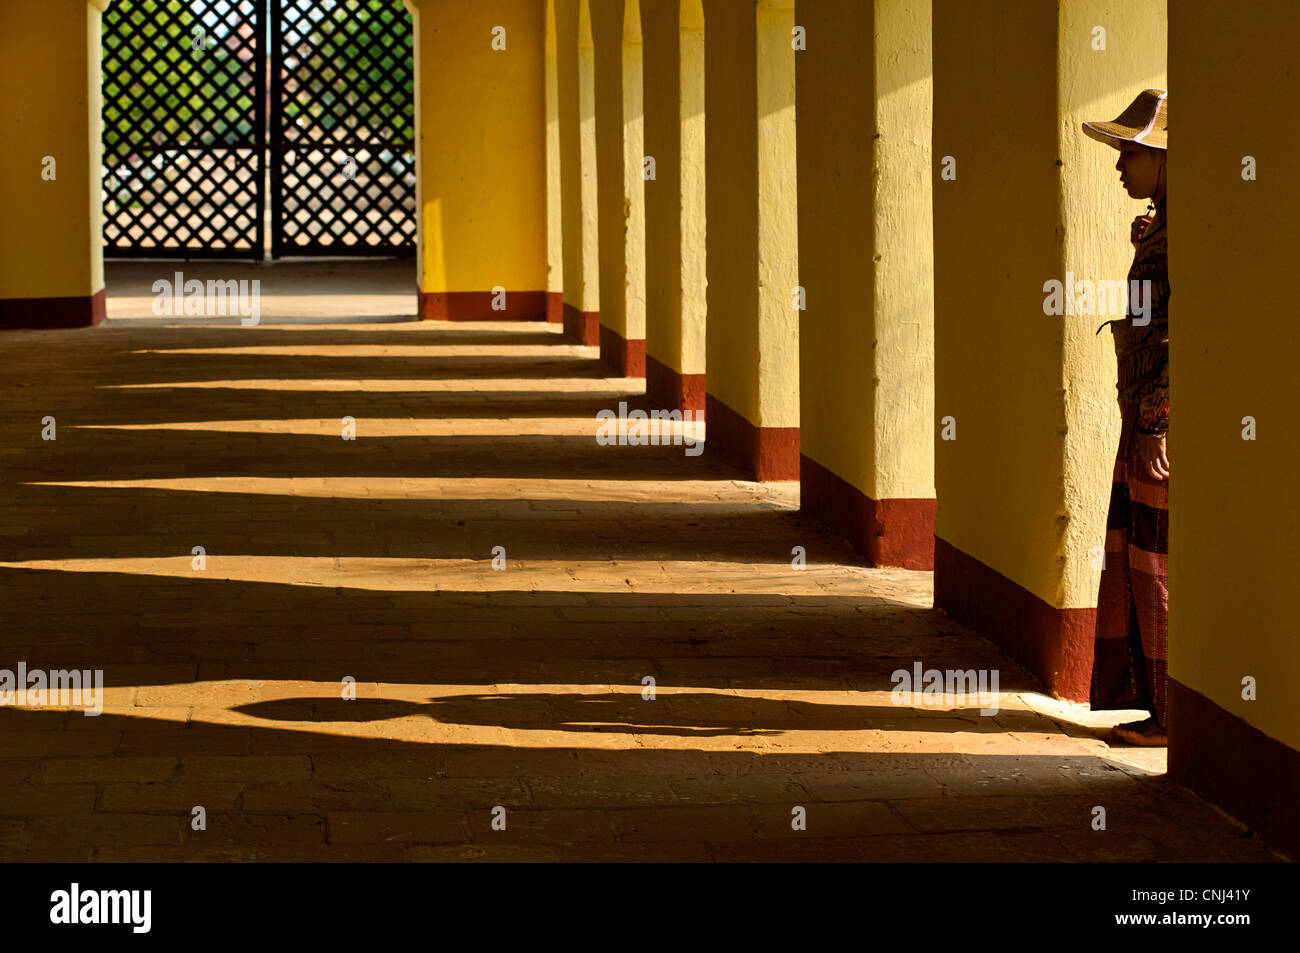 Columns, shadows and silhouettes. Woman standing in arch. Ananda temple, Pagan, Burma. Bagan, Myanmar. Model Released Stock Photo